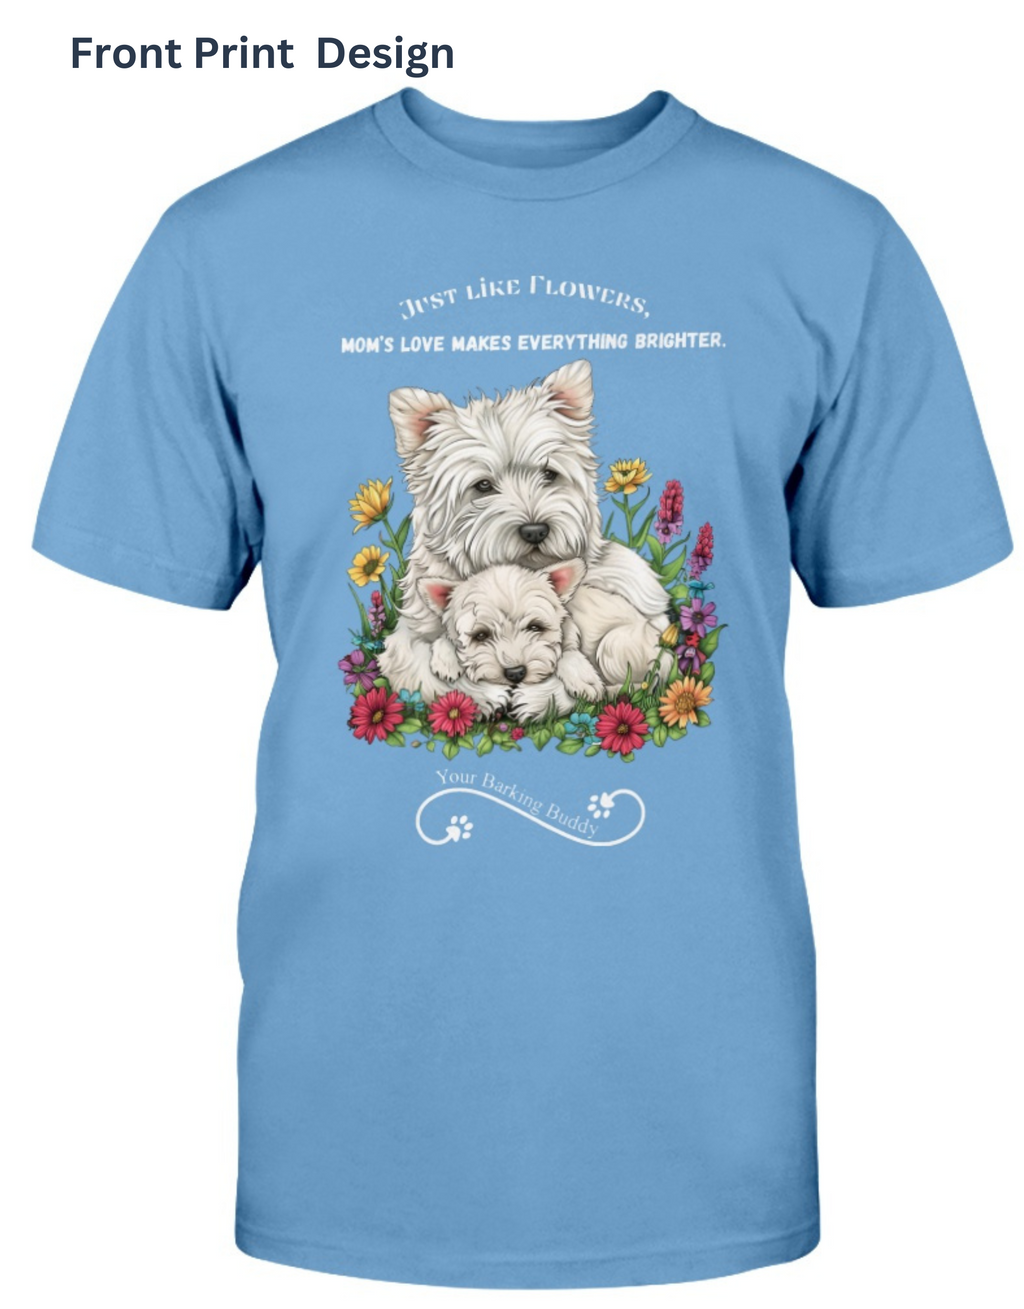 Flower Dog Mom & Puppy Short Sleeve by Your Barking Buddy- Front Print (Pre-Order 2-3 Weeks)